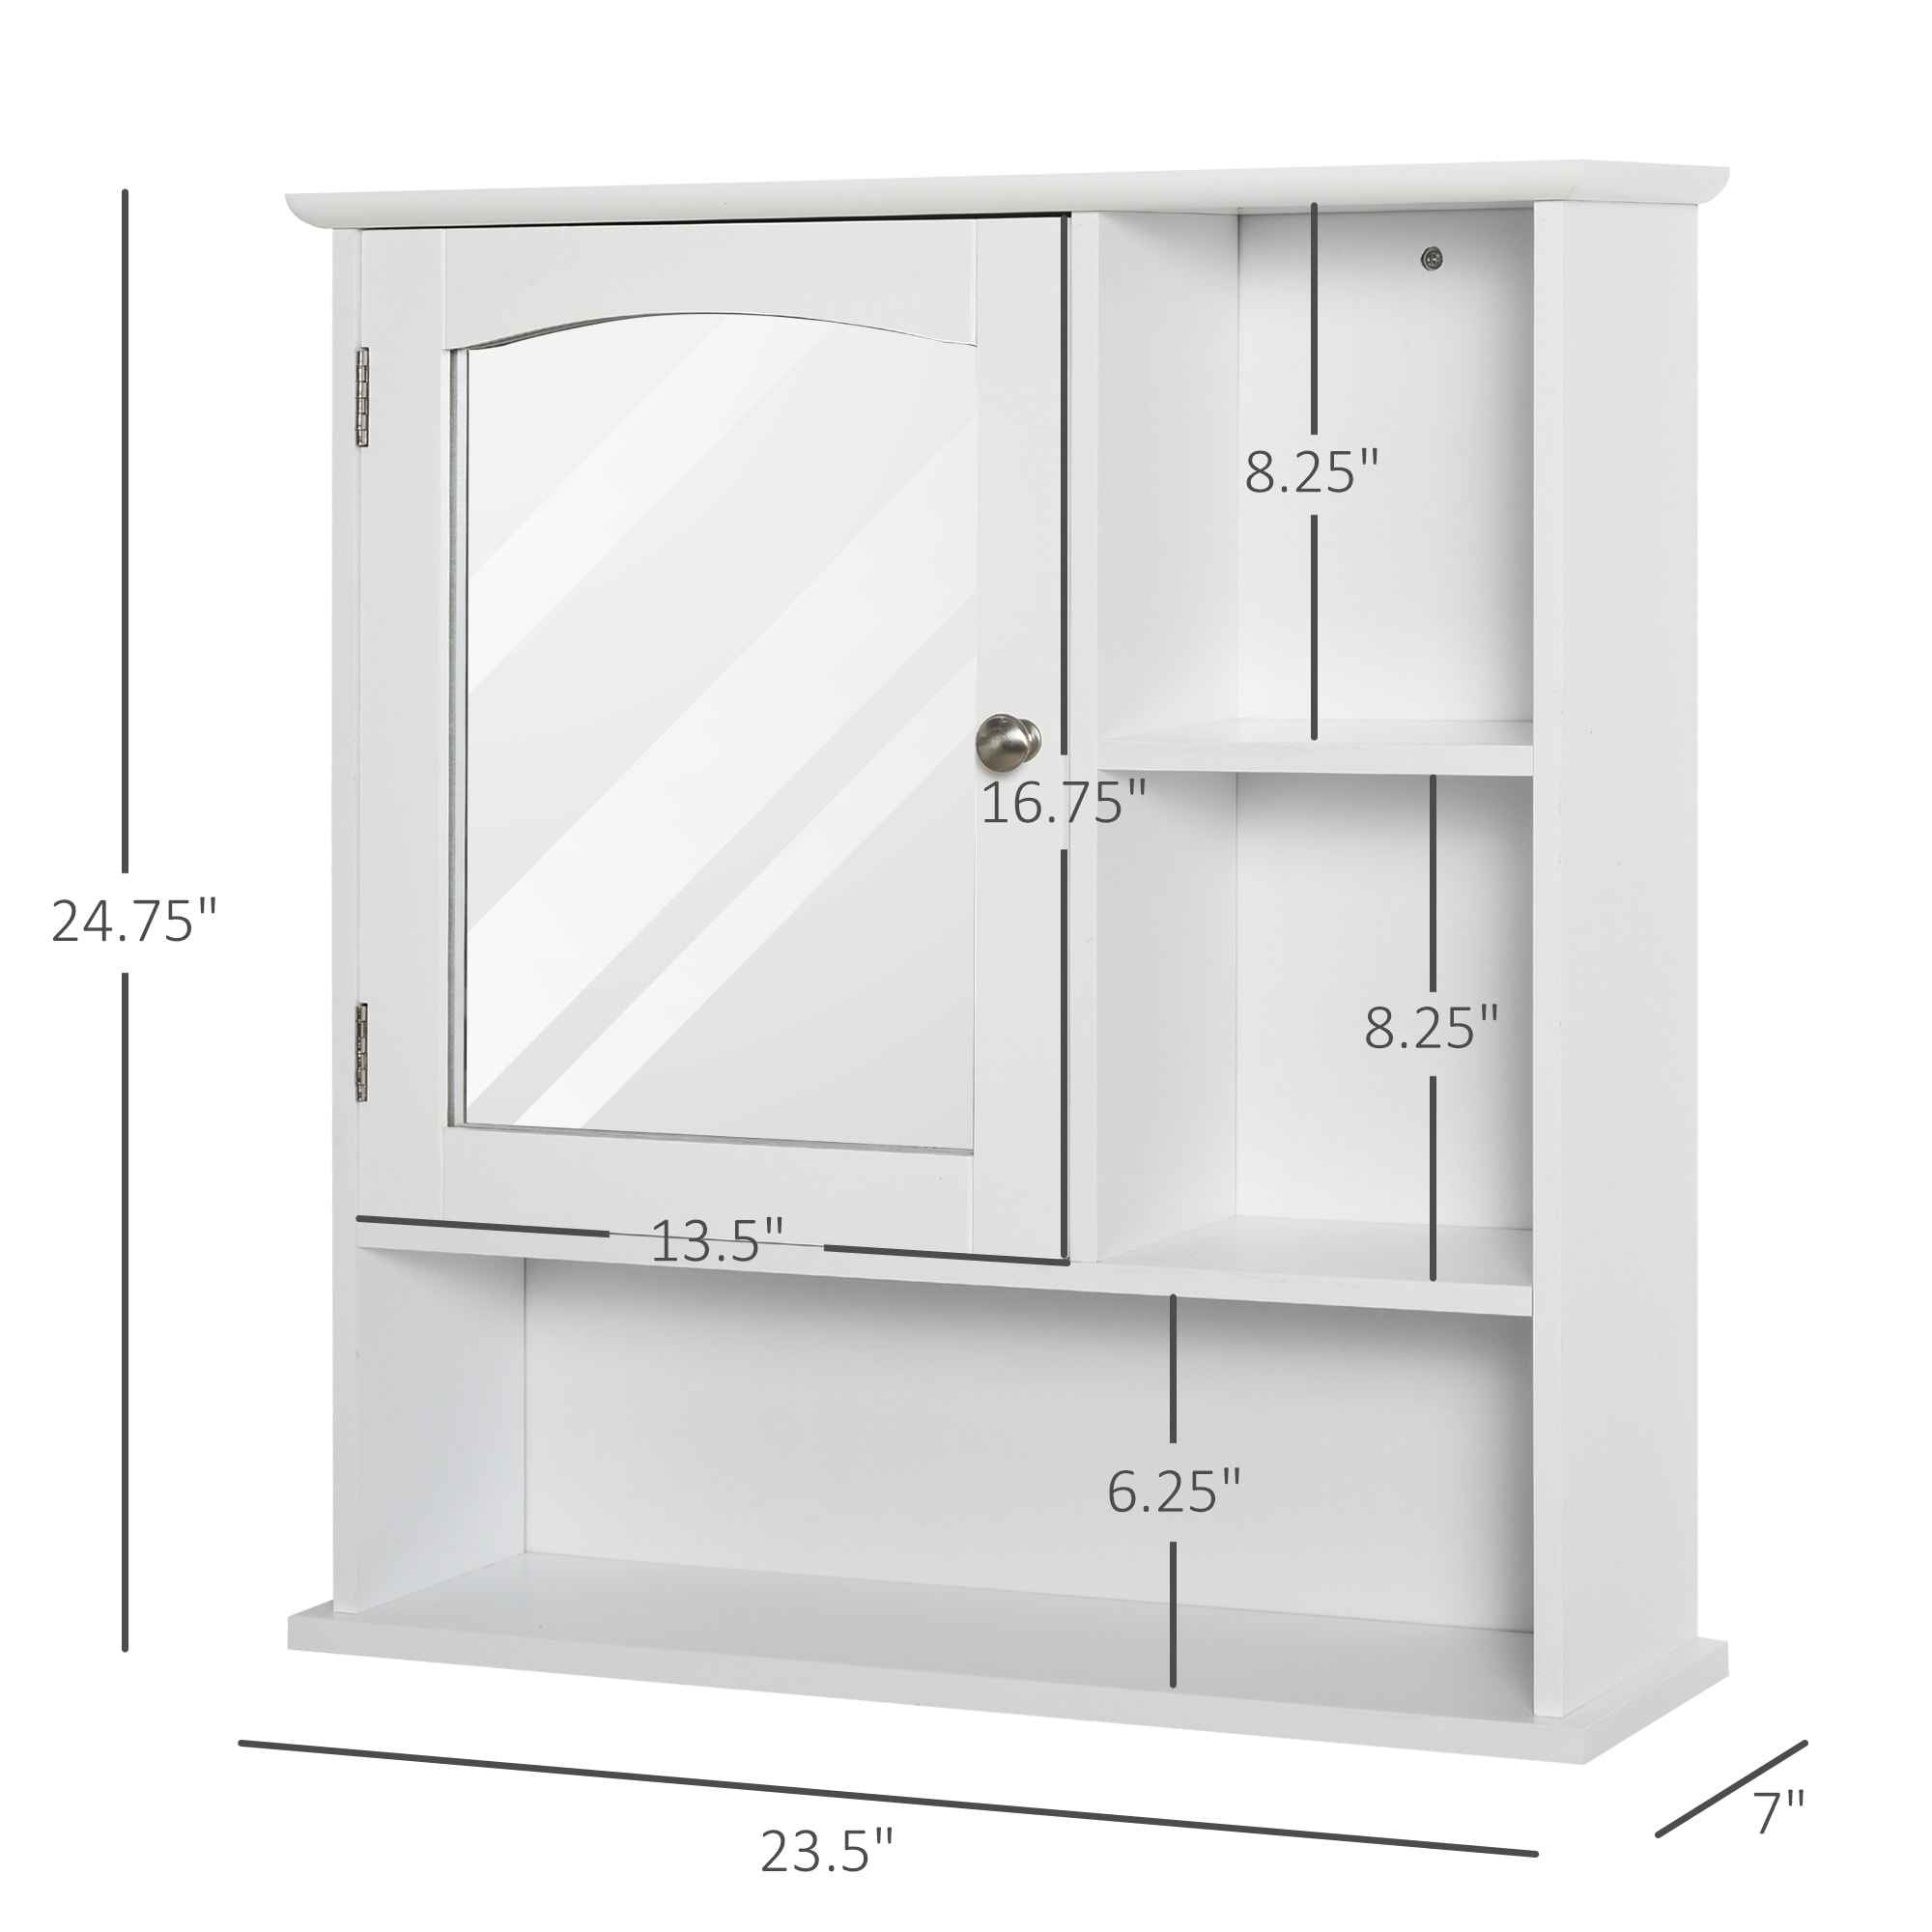 https://ak1.ostkcdn.com/images/products/is/images/direct/2a5a51f121c7f4e77bcce8e3c575a2c0a9554392/kleankin-Wall-Mounted-Bathroom-Storage-Cabinet-Organizer-with-Mirror%2C-Adjustable-Shelf%2C-and-Magnetic-Door-Design%2C-White.jpg